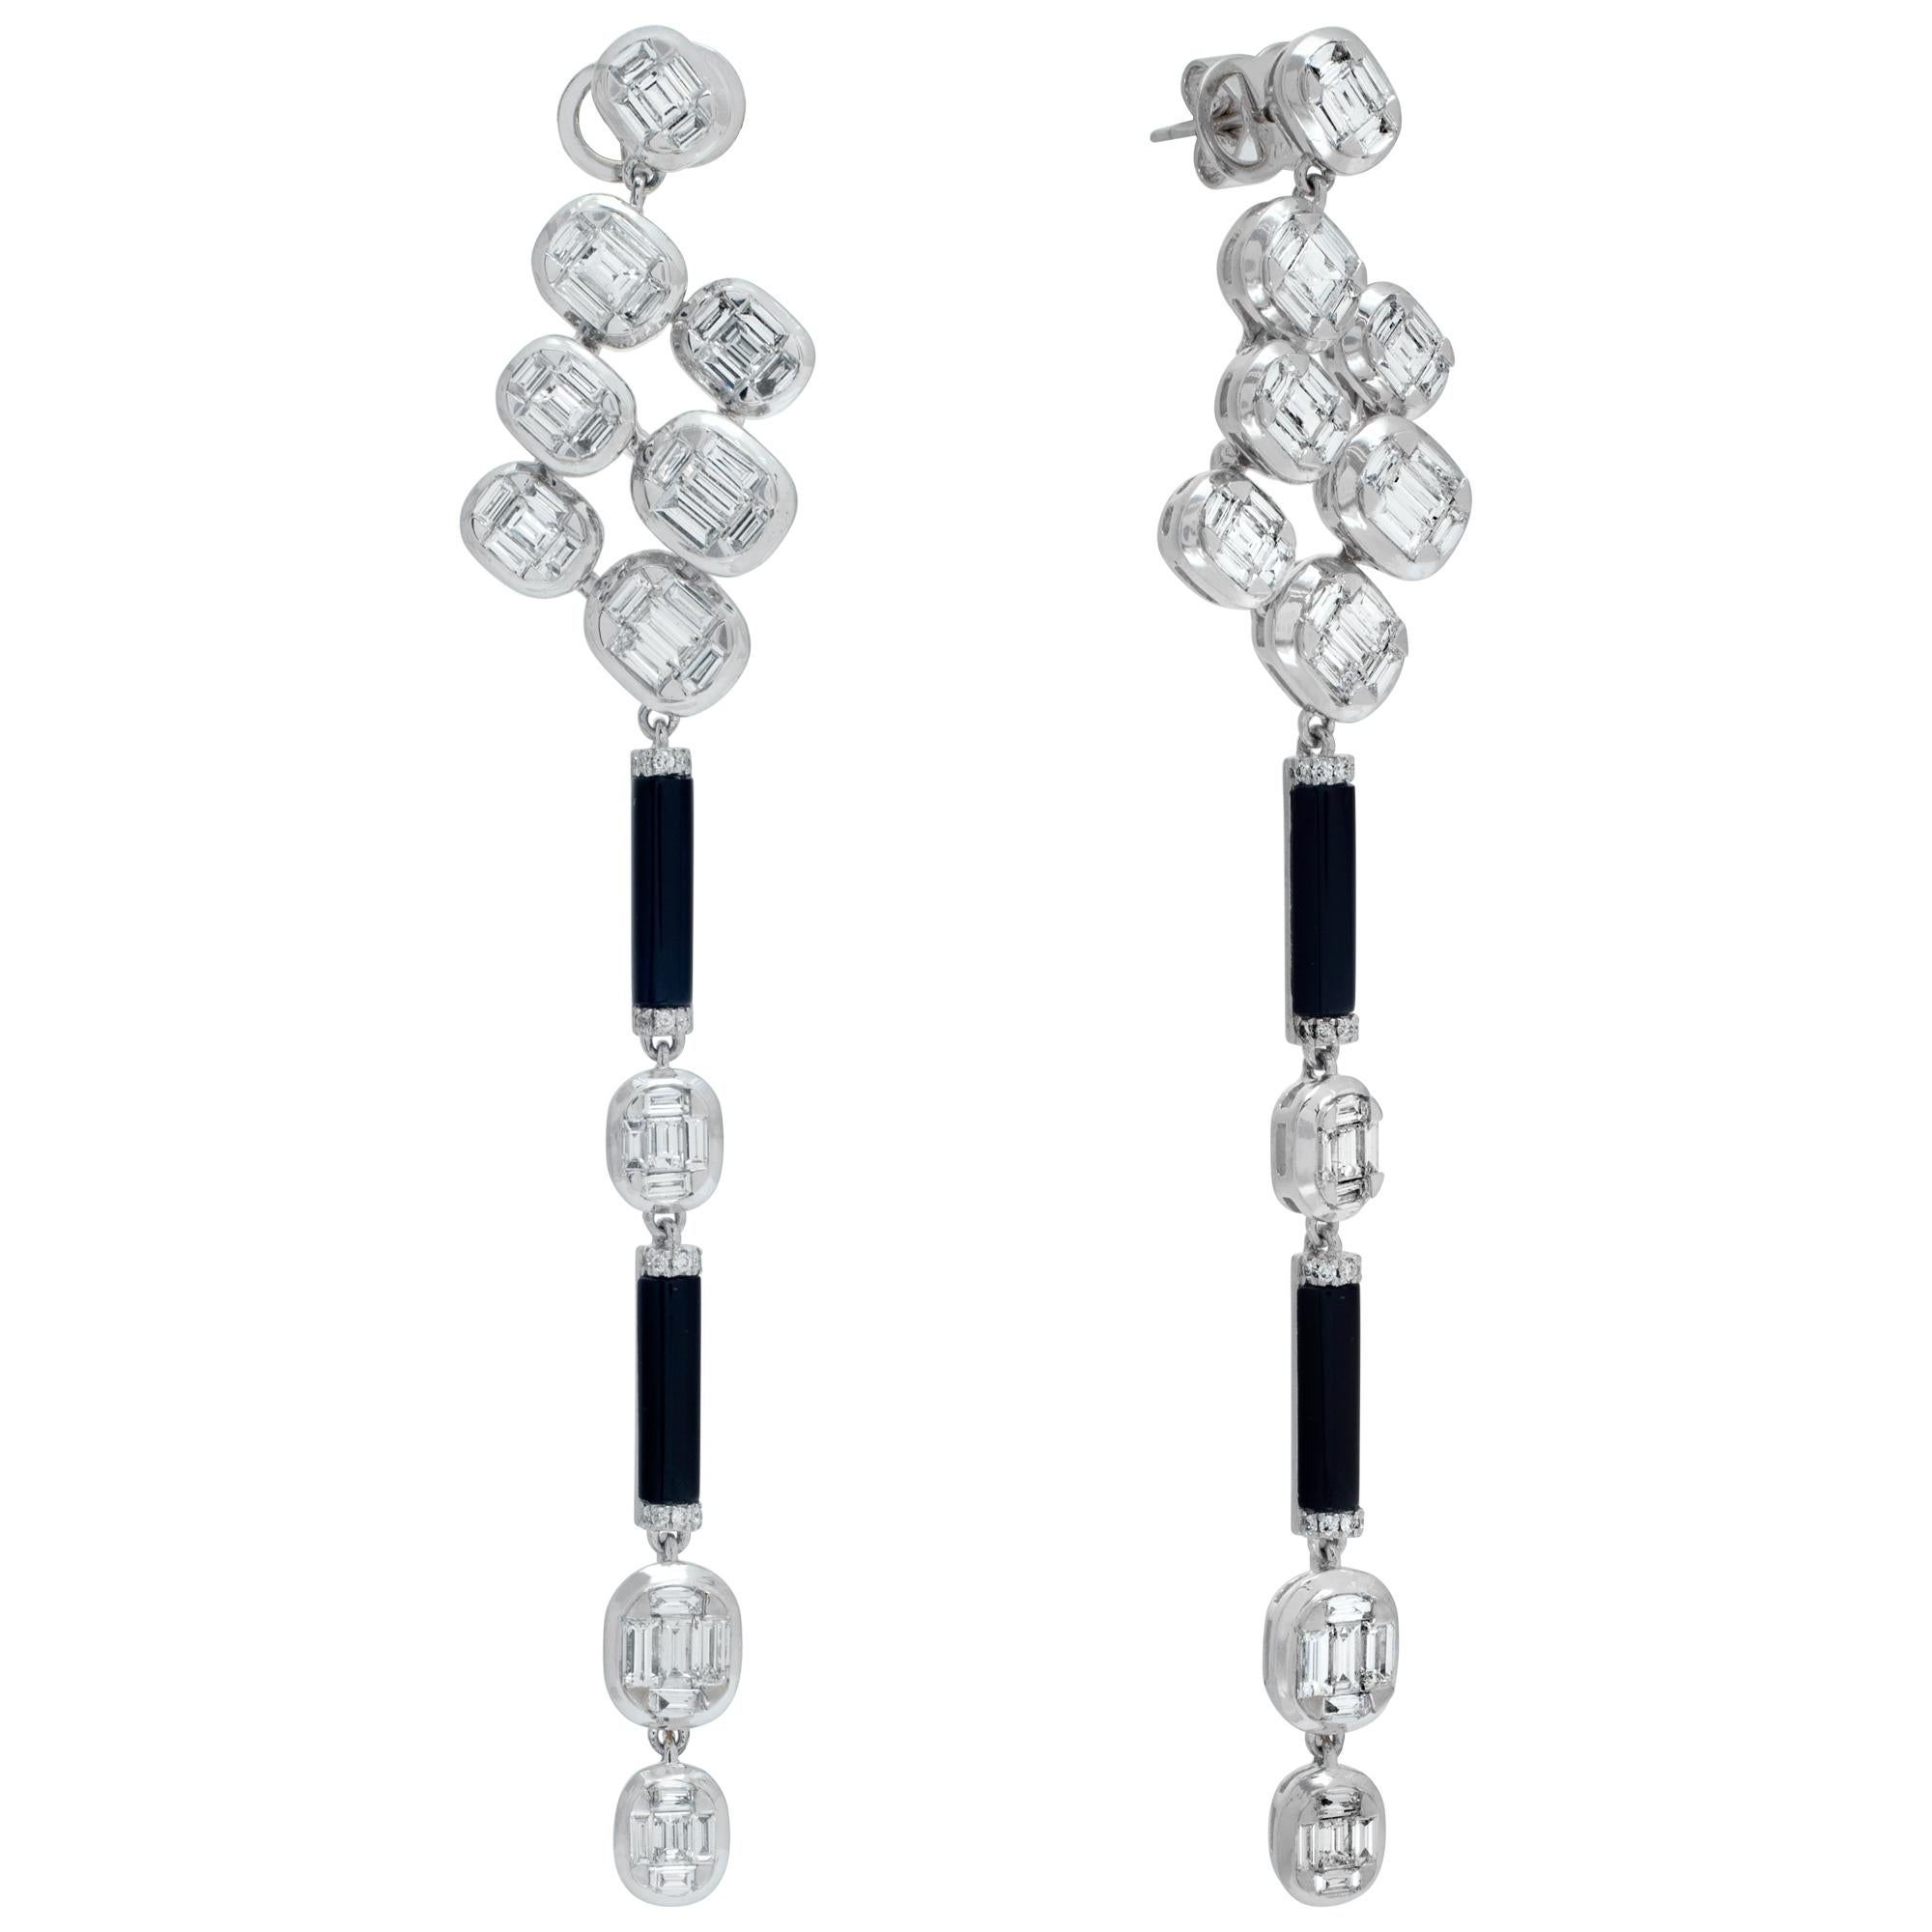 Baguettes, round brilliant diamonds and onyx hanging earrings in 18k white gold. Baguettes and round brilliant diamonds total approx. weight: 3.77 carats, estimate G-H color, VS clarity. Length 3.5 inches.